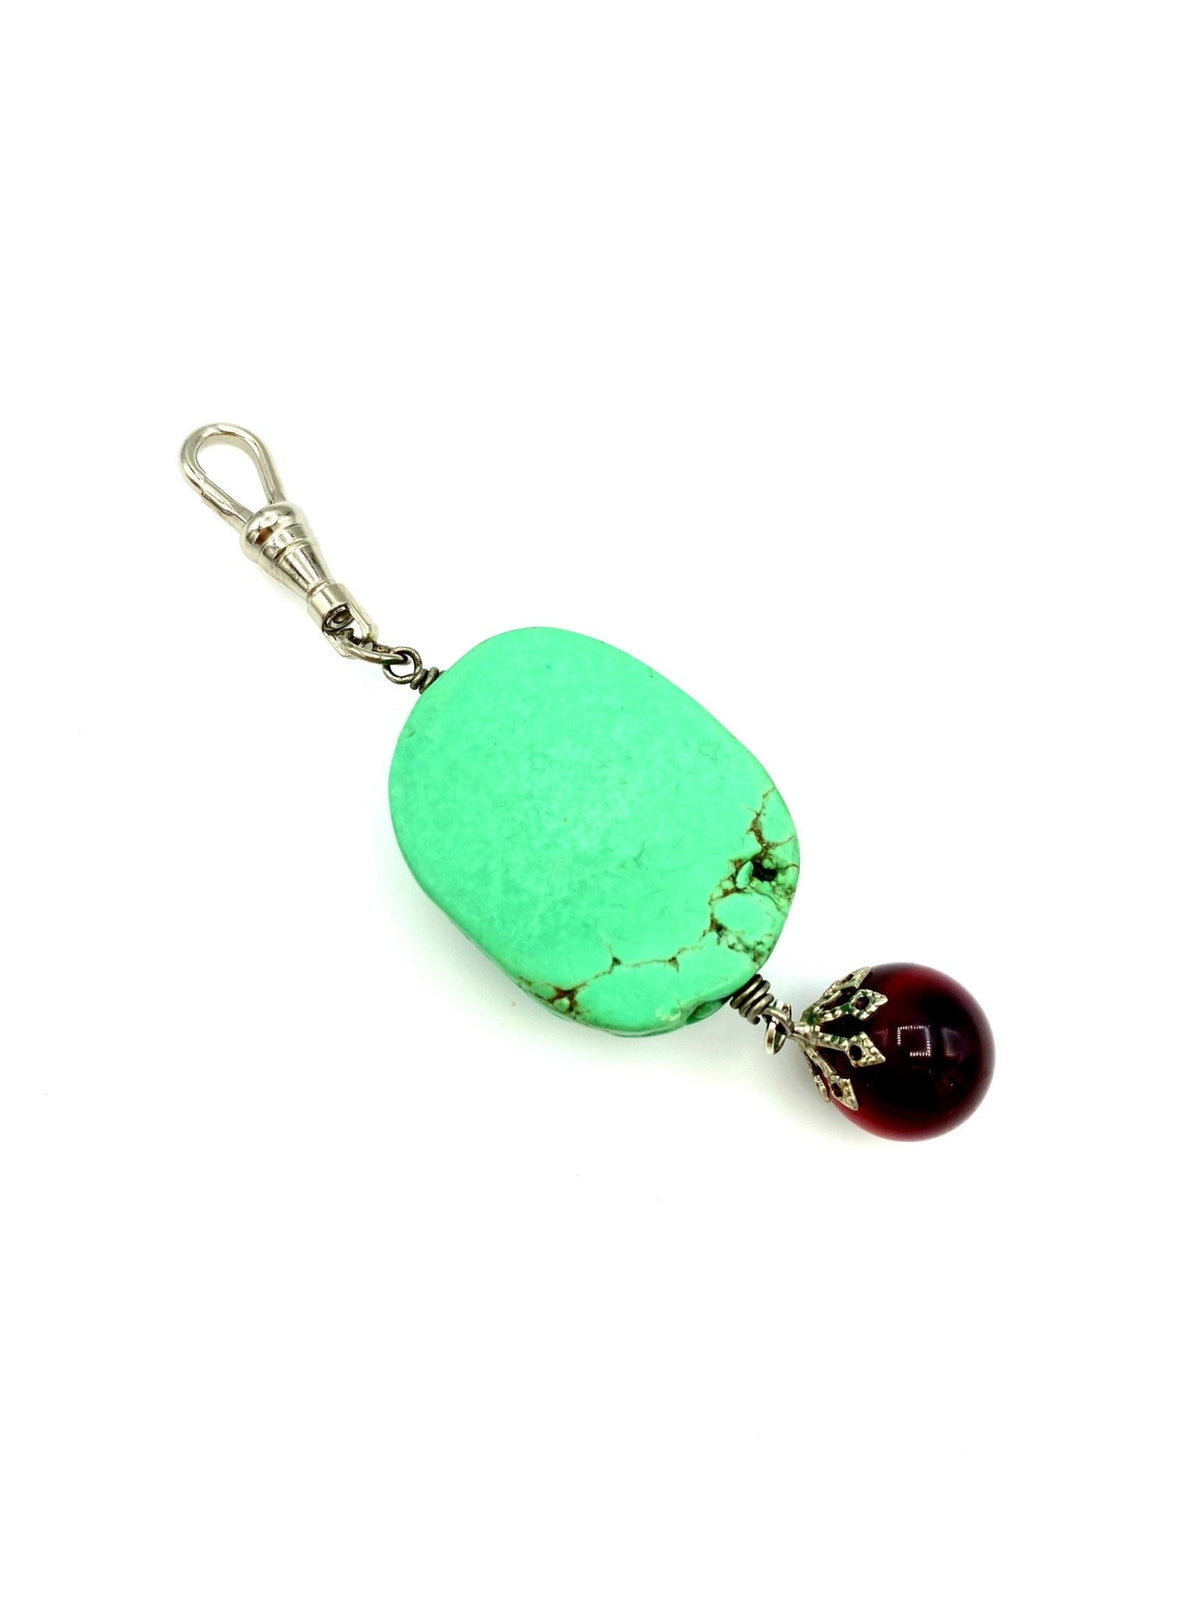 Silver Large Turquoise Scarab Beatle Charm - 24 Wishes Vintage Jewelry